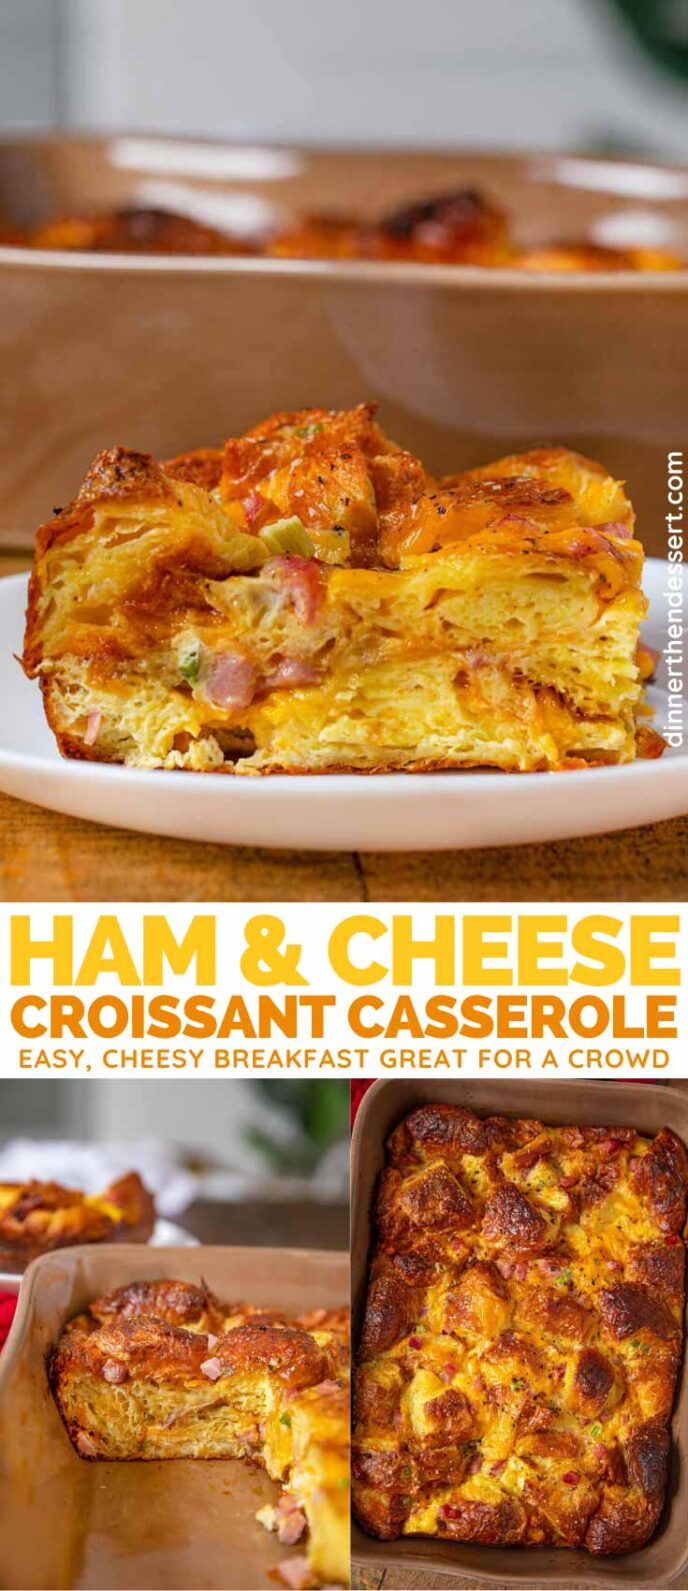 Ham, Egg and Cheese Croissant Casserole collage